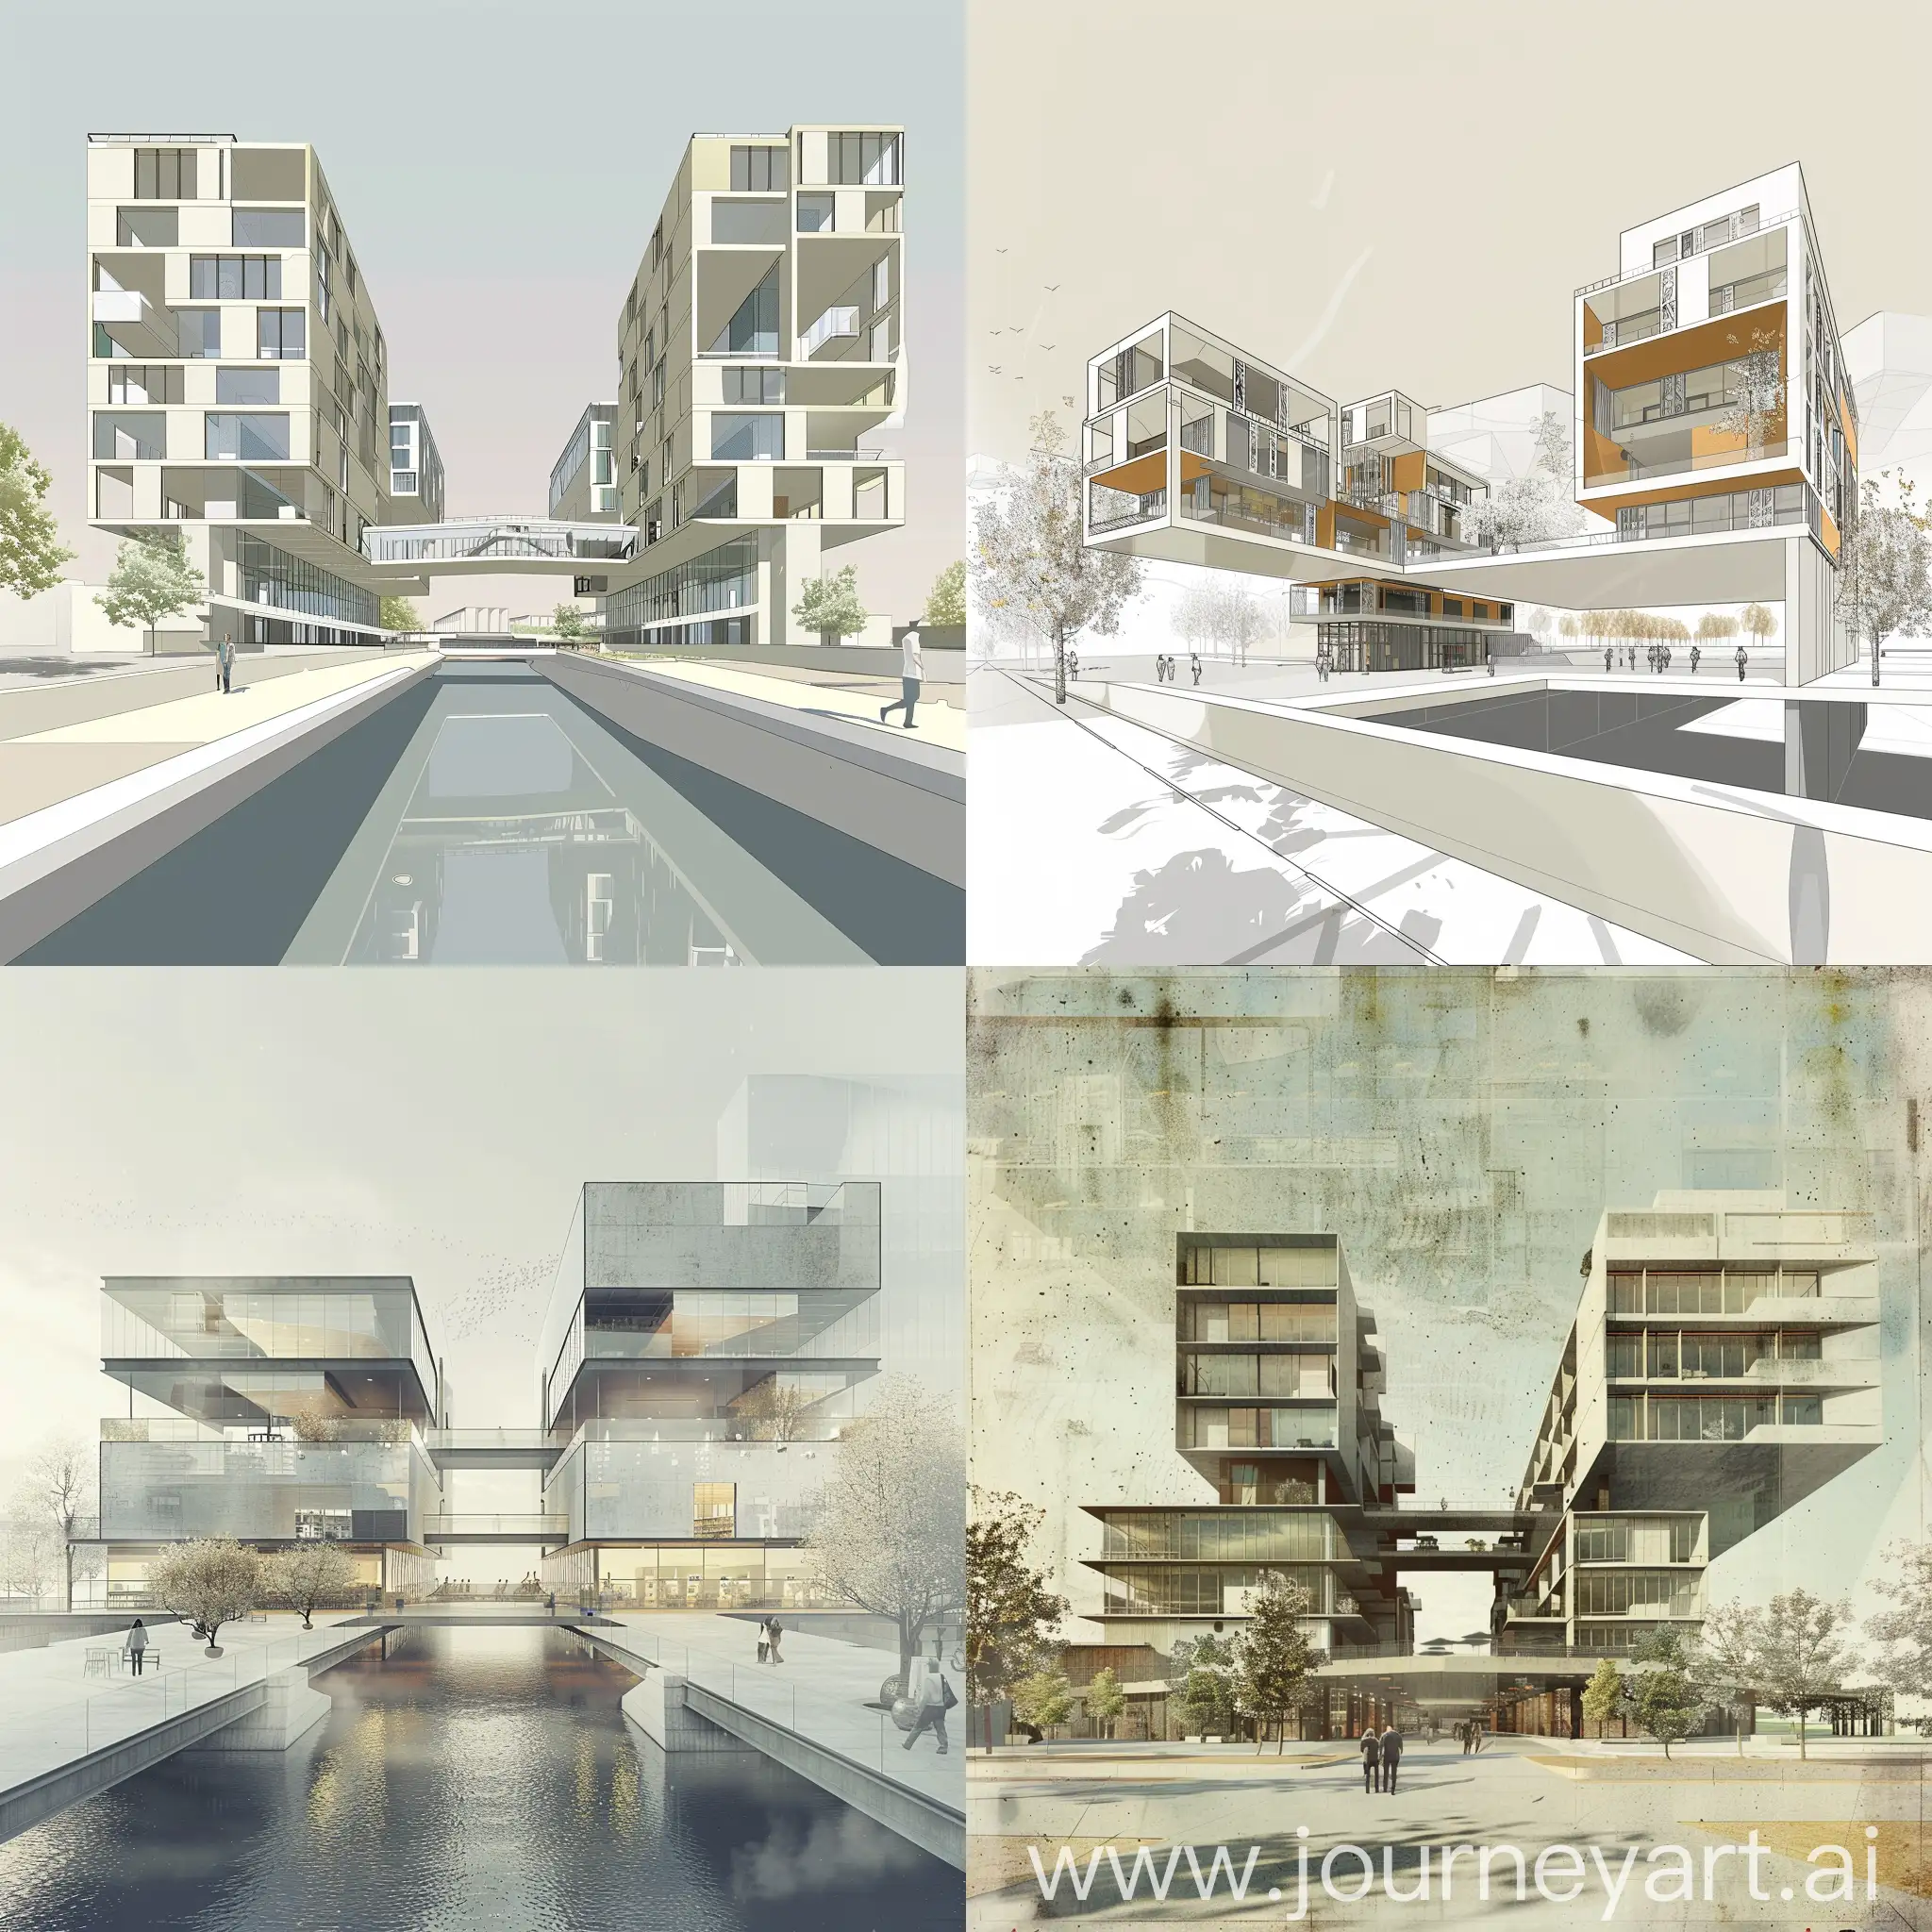 Innovative-Hybrid-Building-Design-Featuring-Modern-Commerce-Space-and-Deconstructivist-Residential-Towers